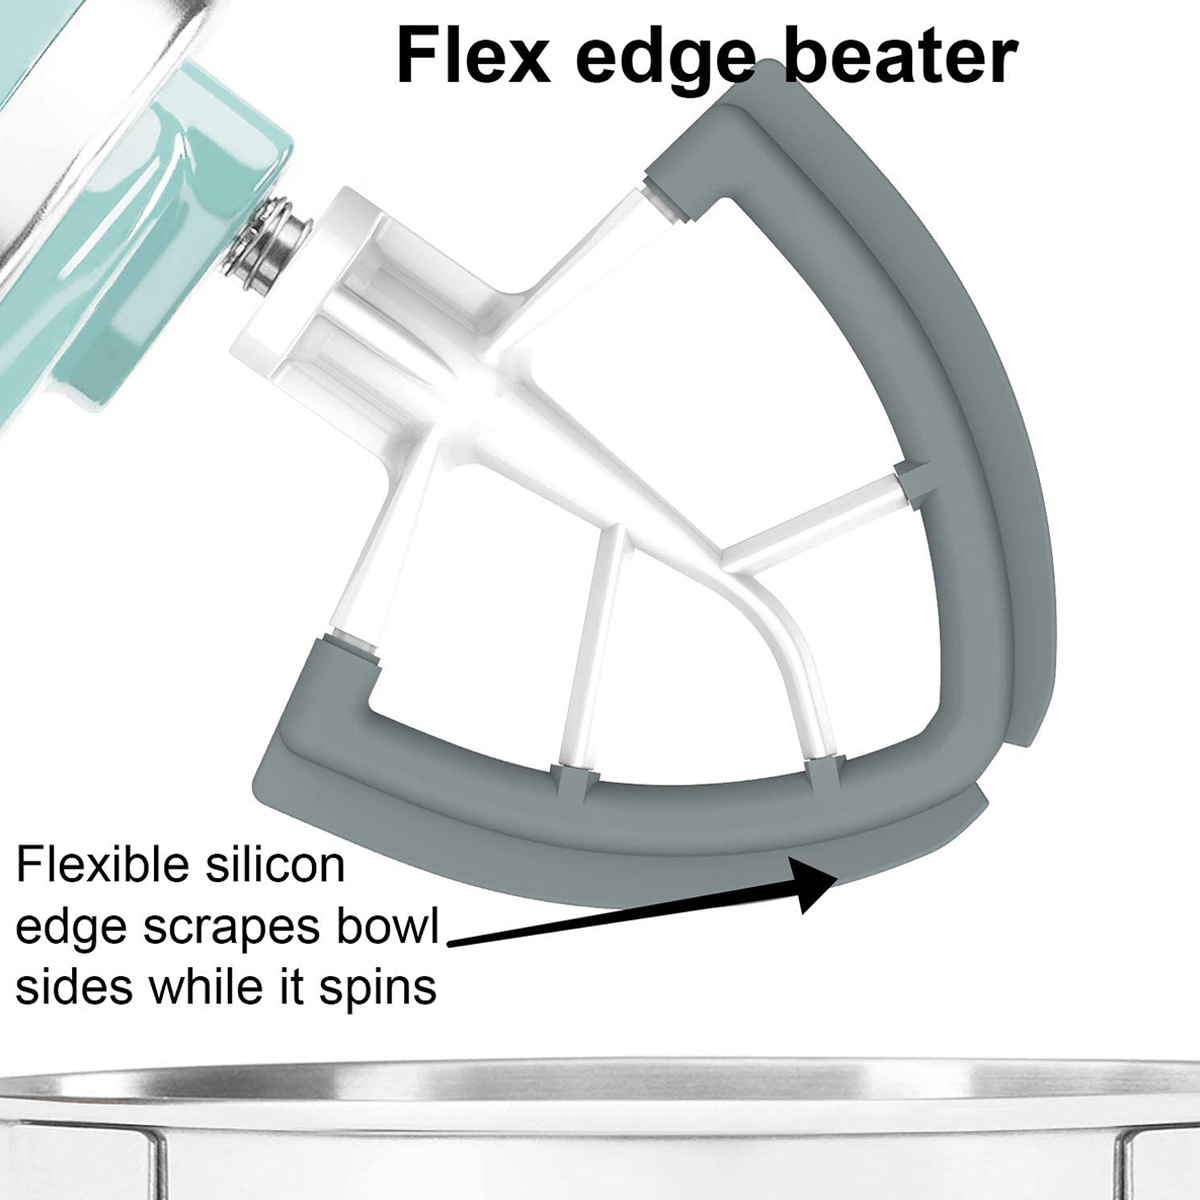 Tilt Head 4.5/5 Quart Flex Edge Beater for Pouring Shield Stand Mixer Replacement for Kitchen,Total Specialty Tools